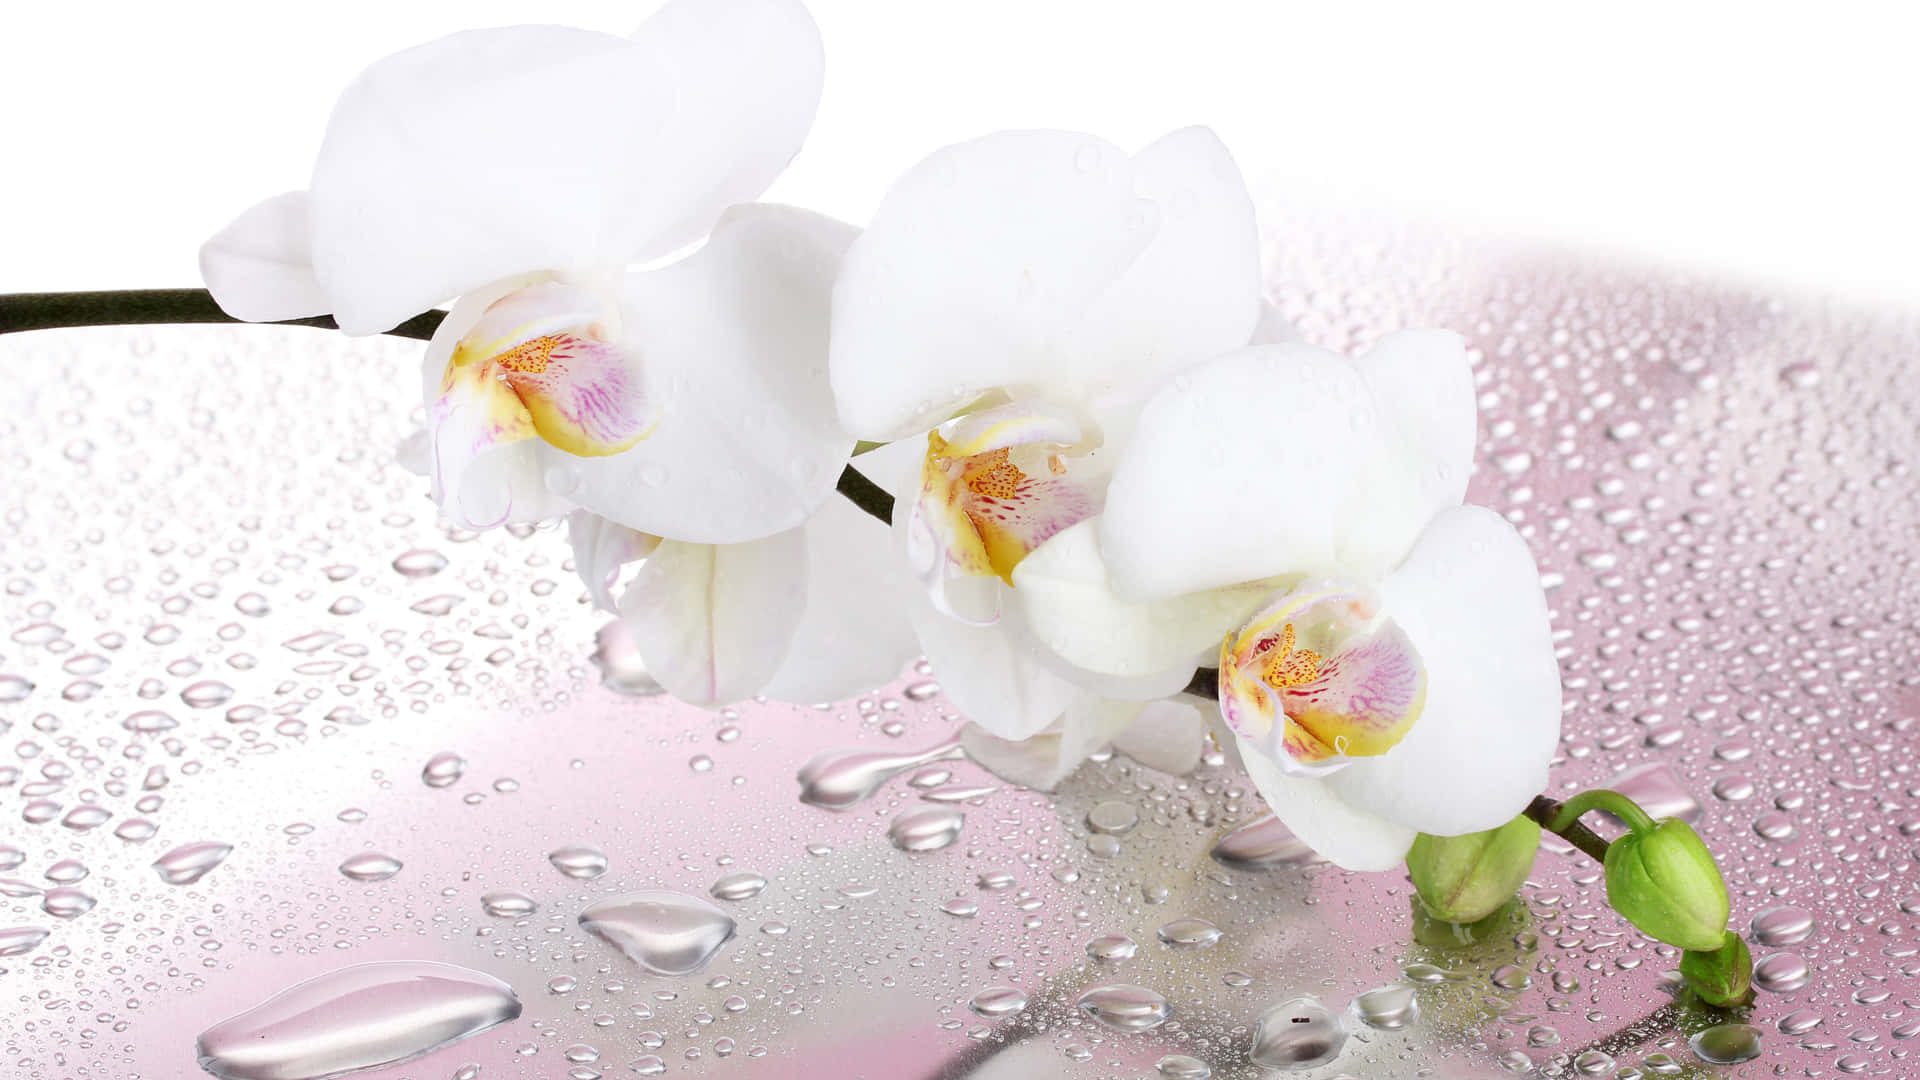 Elegant Orchid Blooms Against a Soft Background